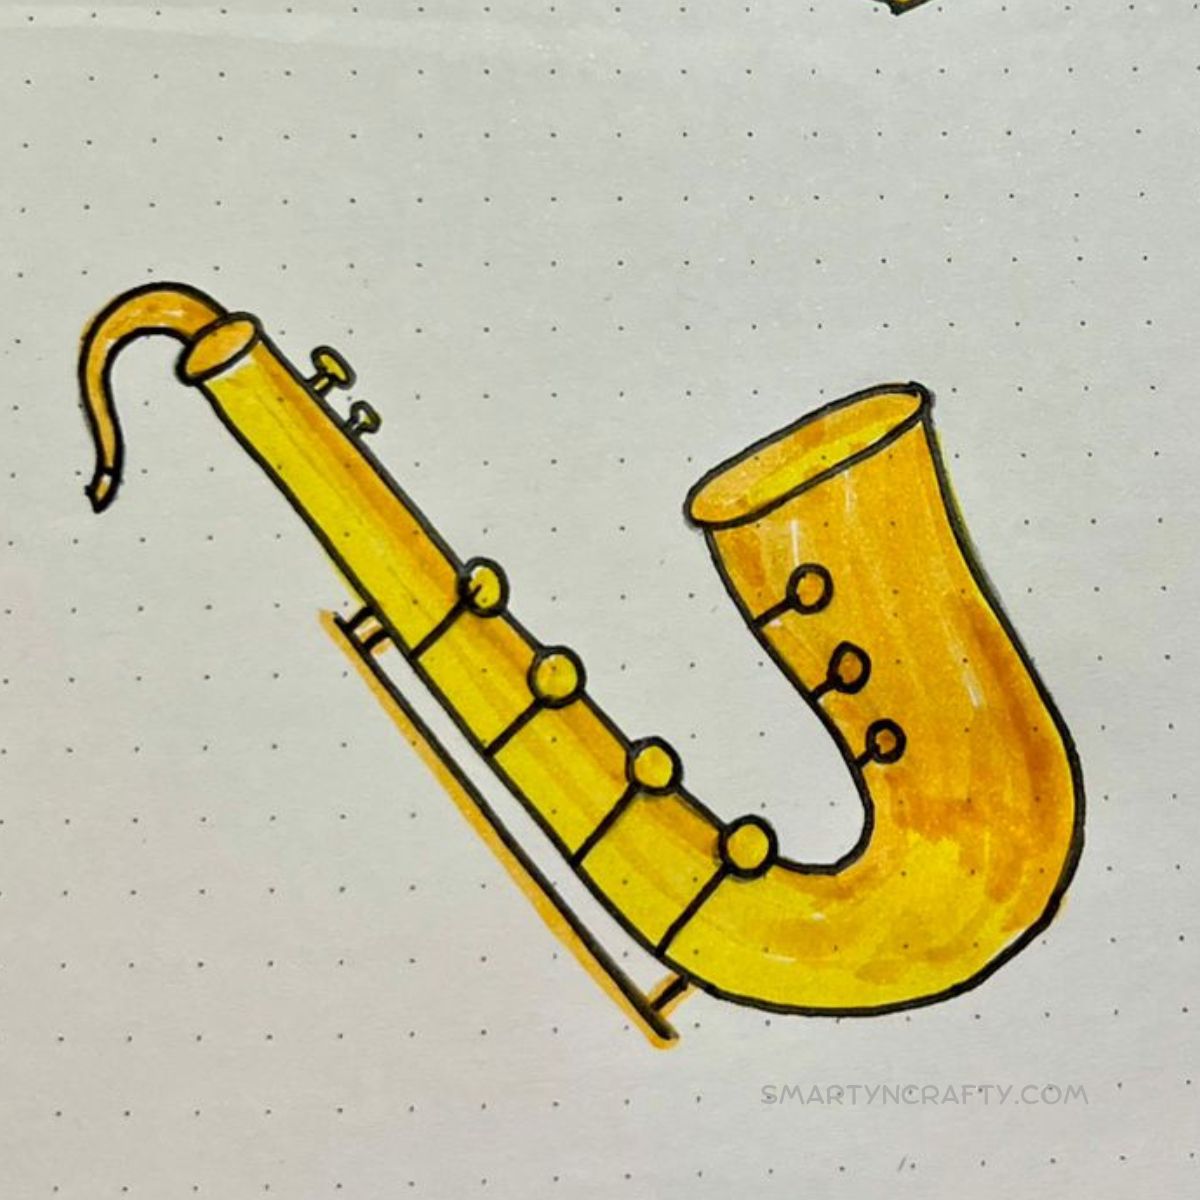 how to draw a saxophone